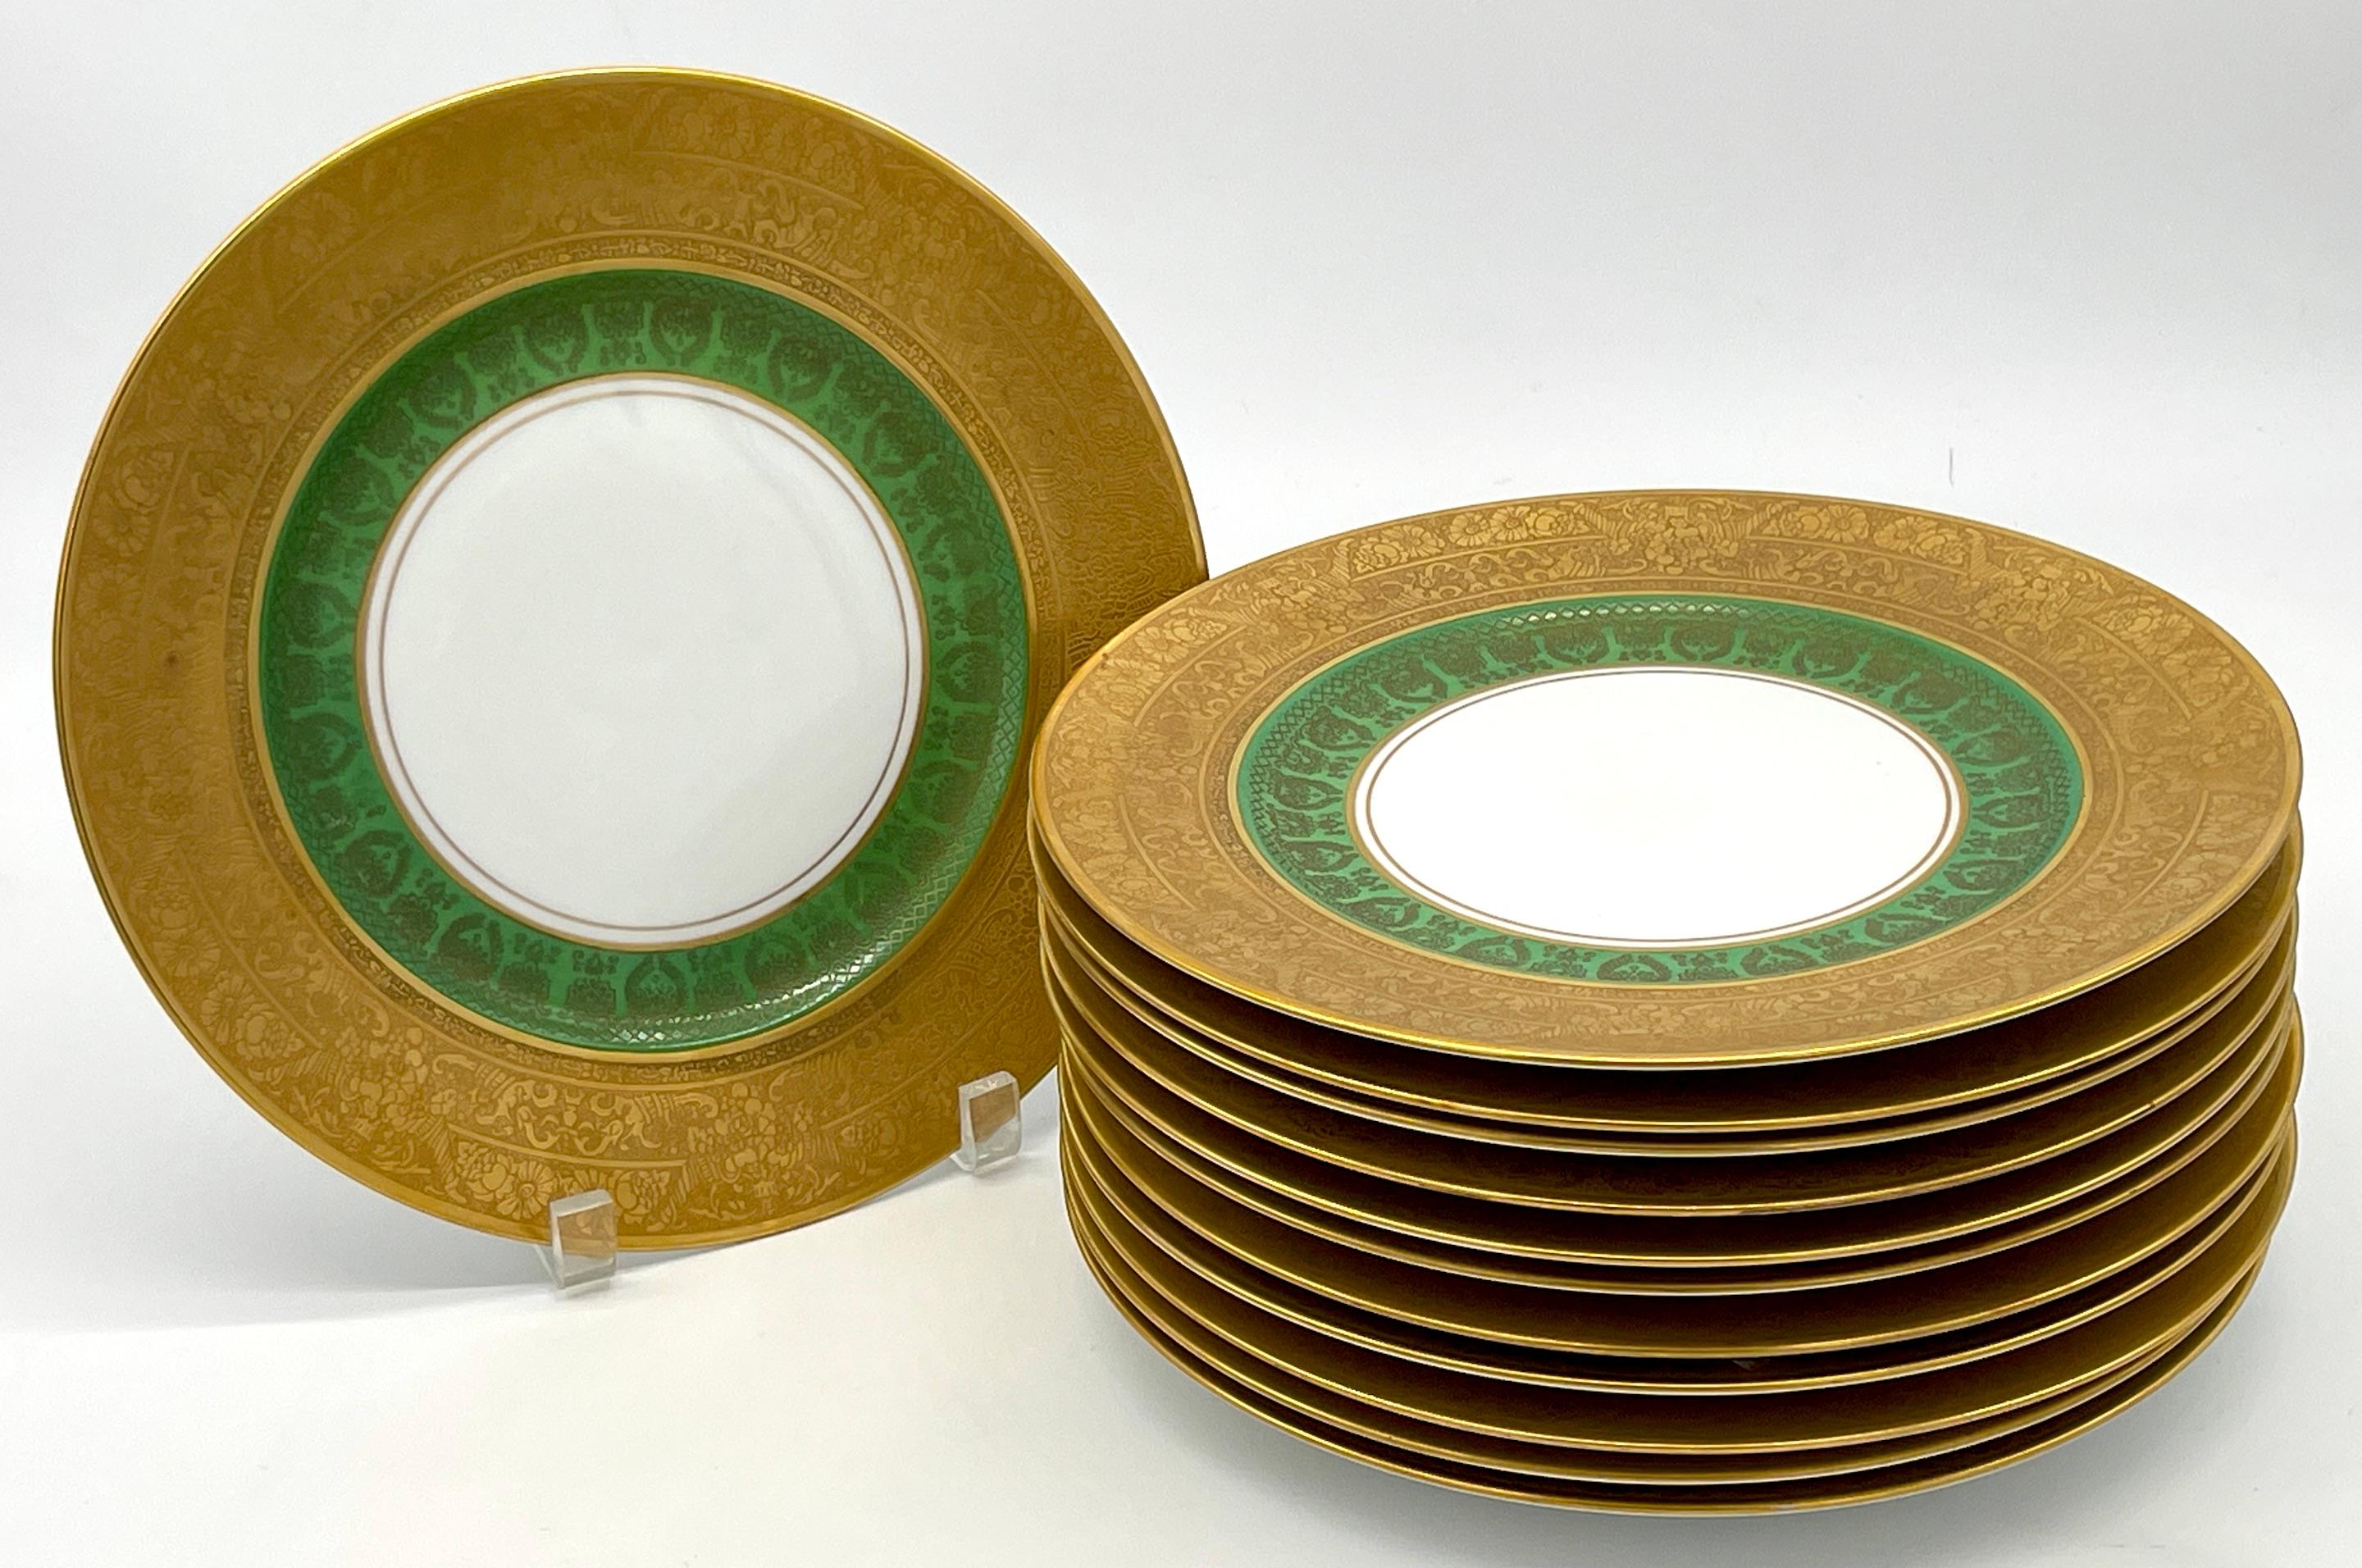 German 12 Hutchenreuther Gold Encrusted & Green Border Neoclassical Service Plates